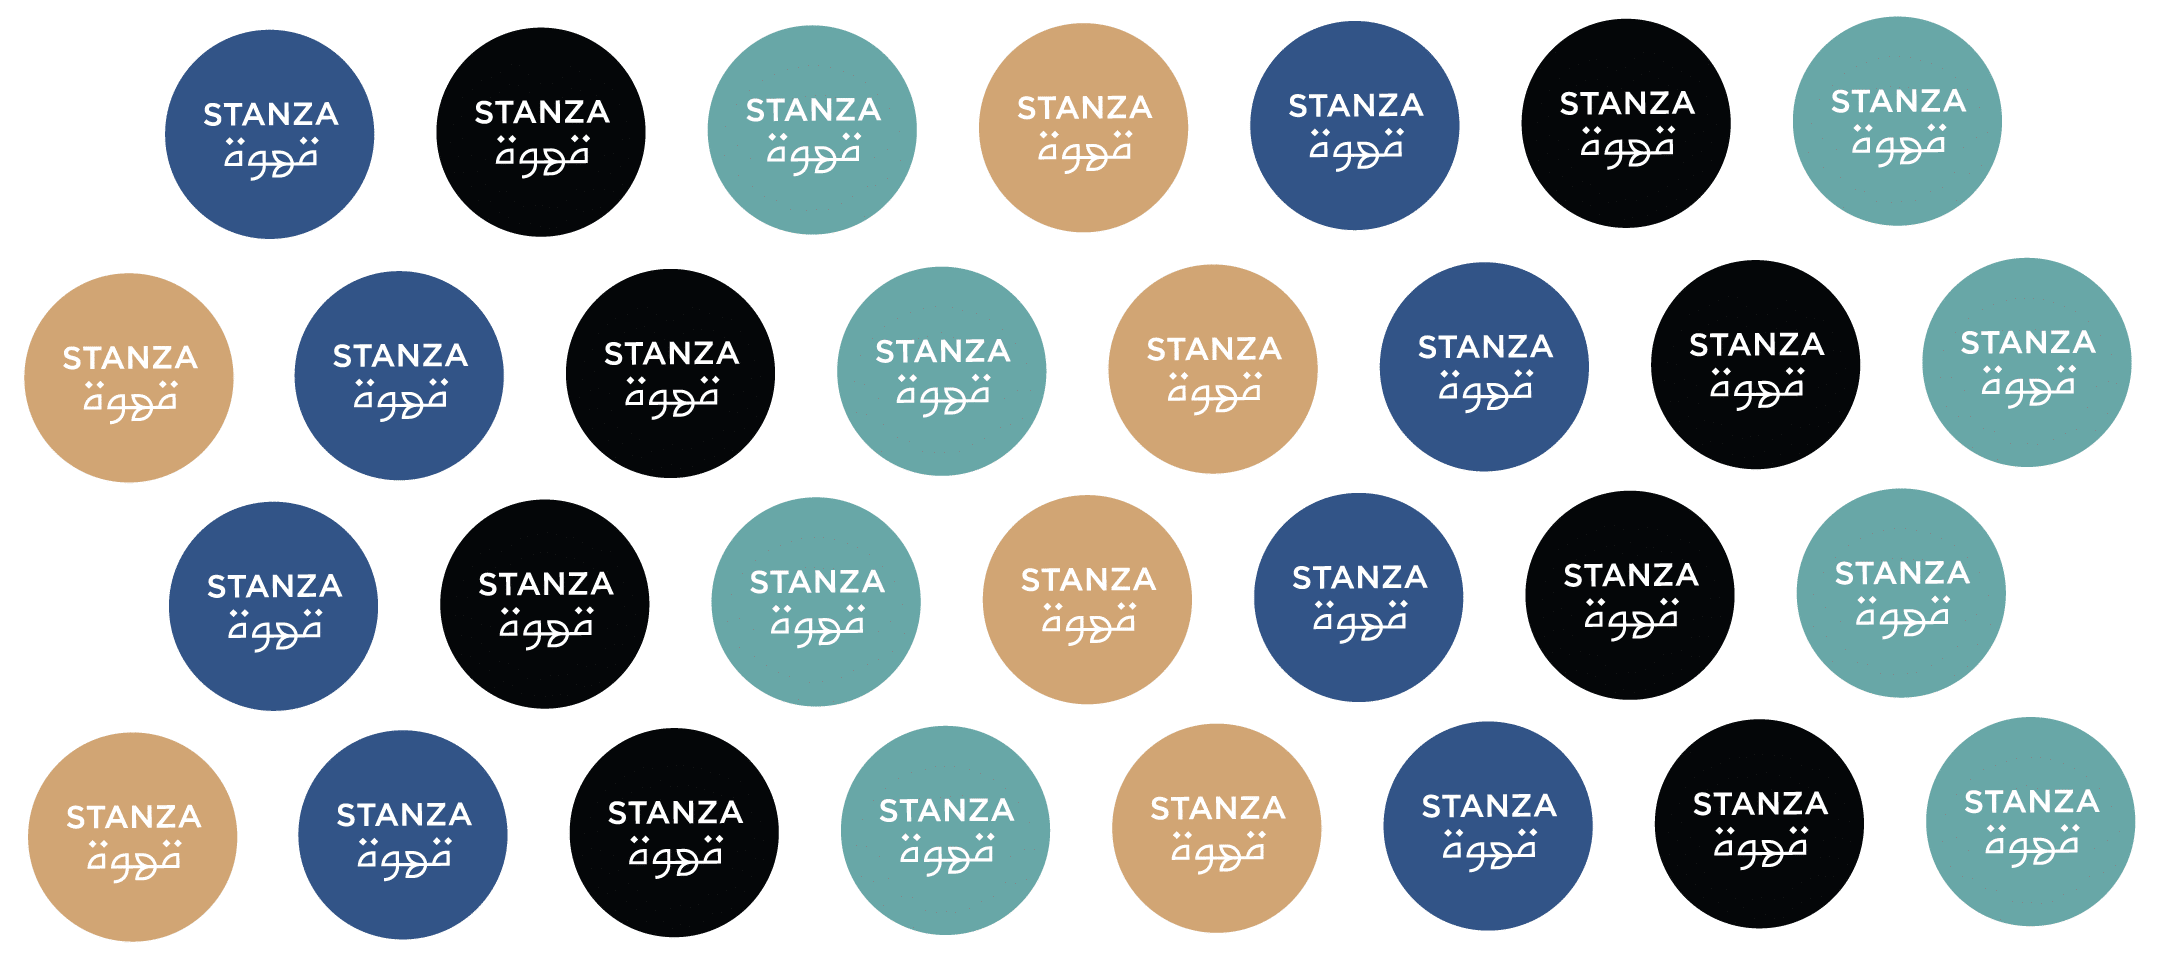 social media icons for stanza